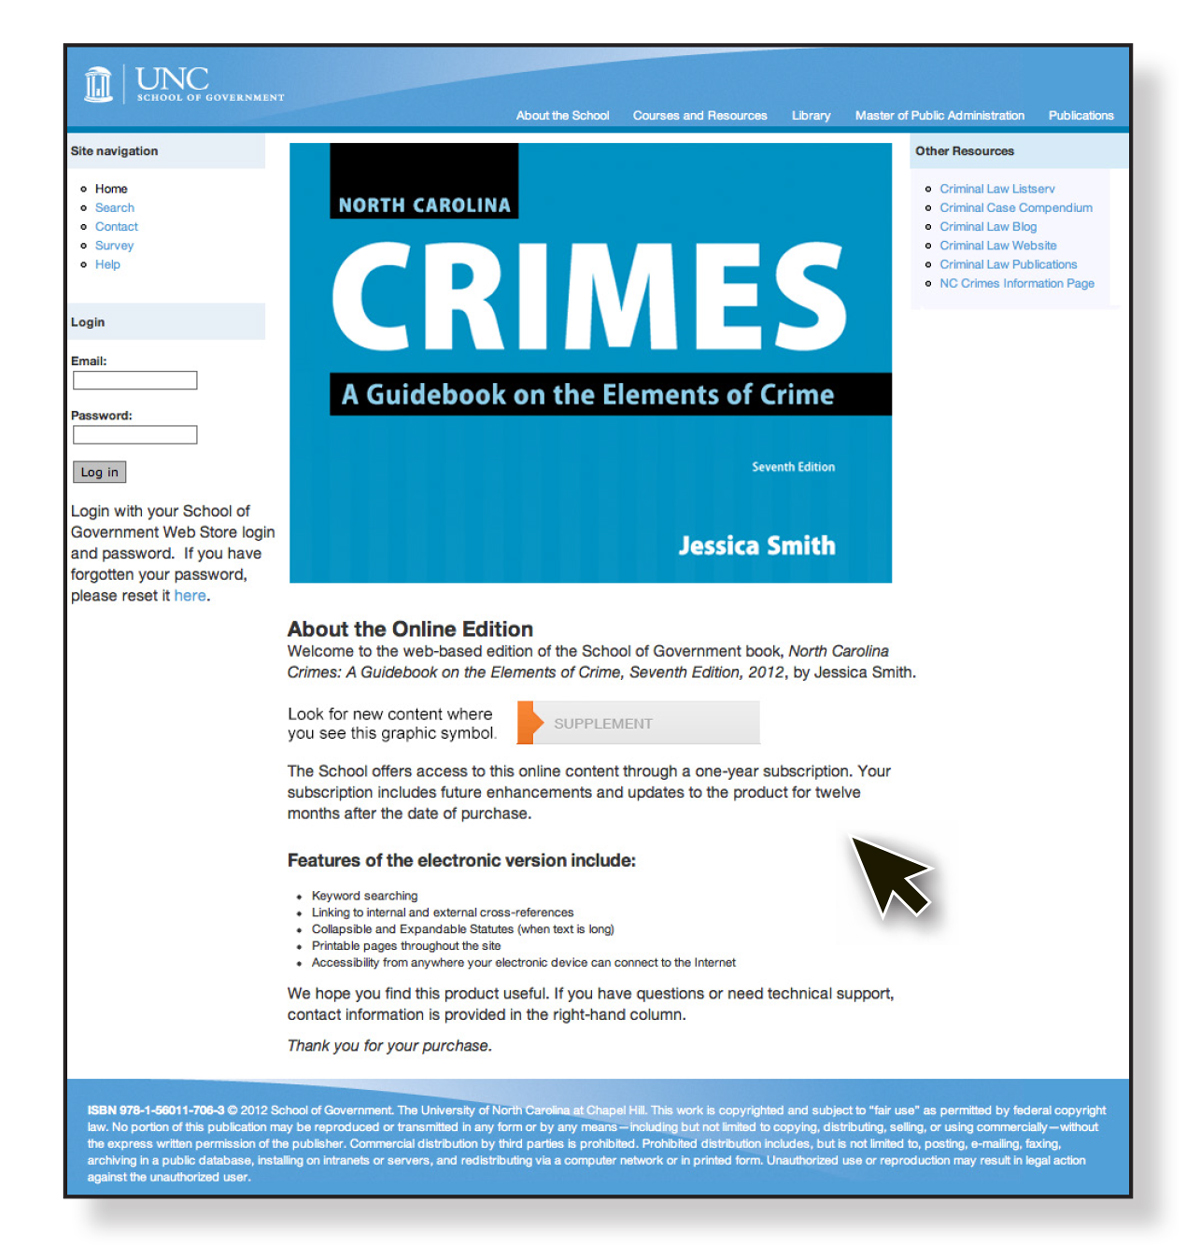 North Carolina Crimes: A Guidebook on the Elements of Crime online edition